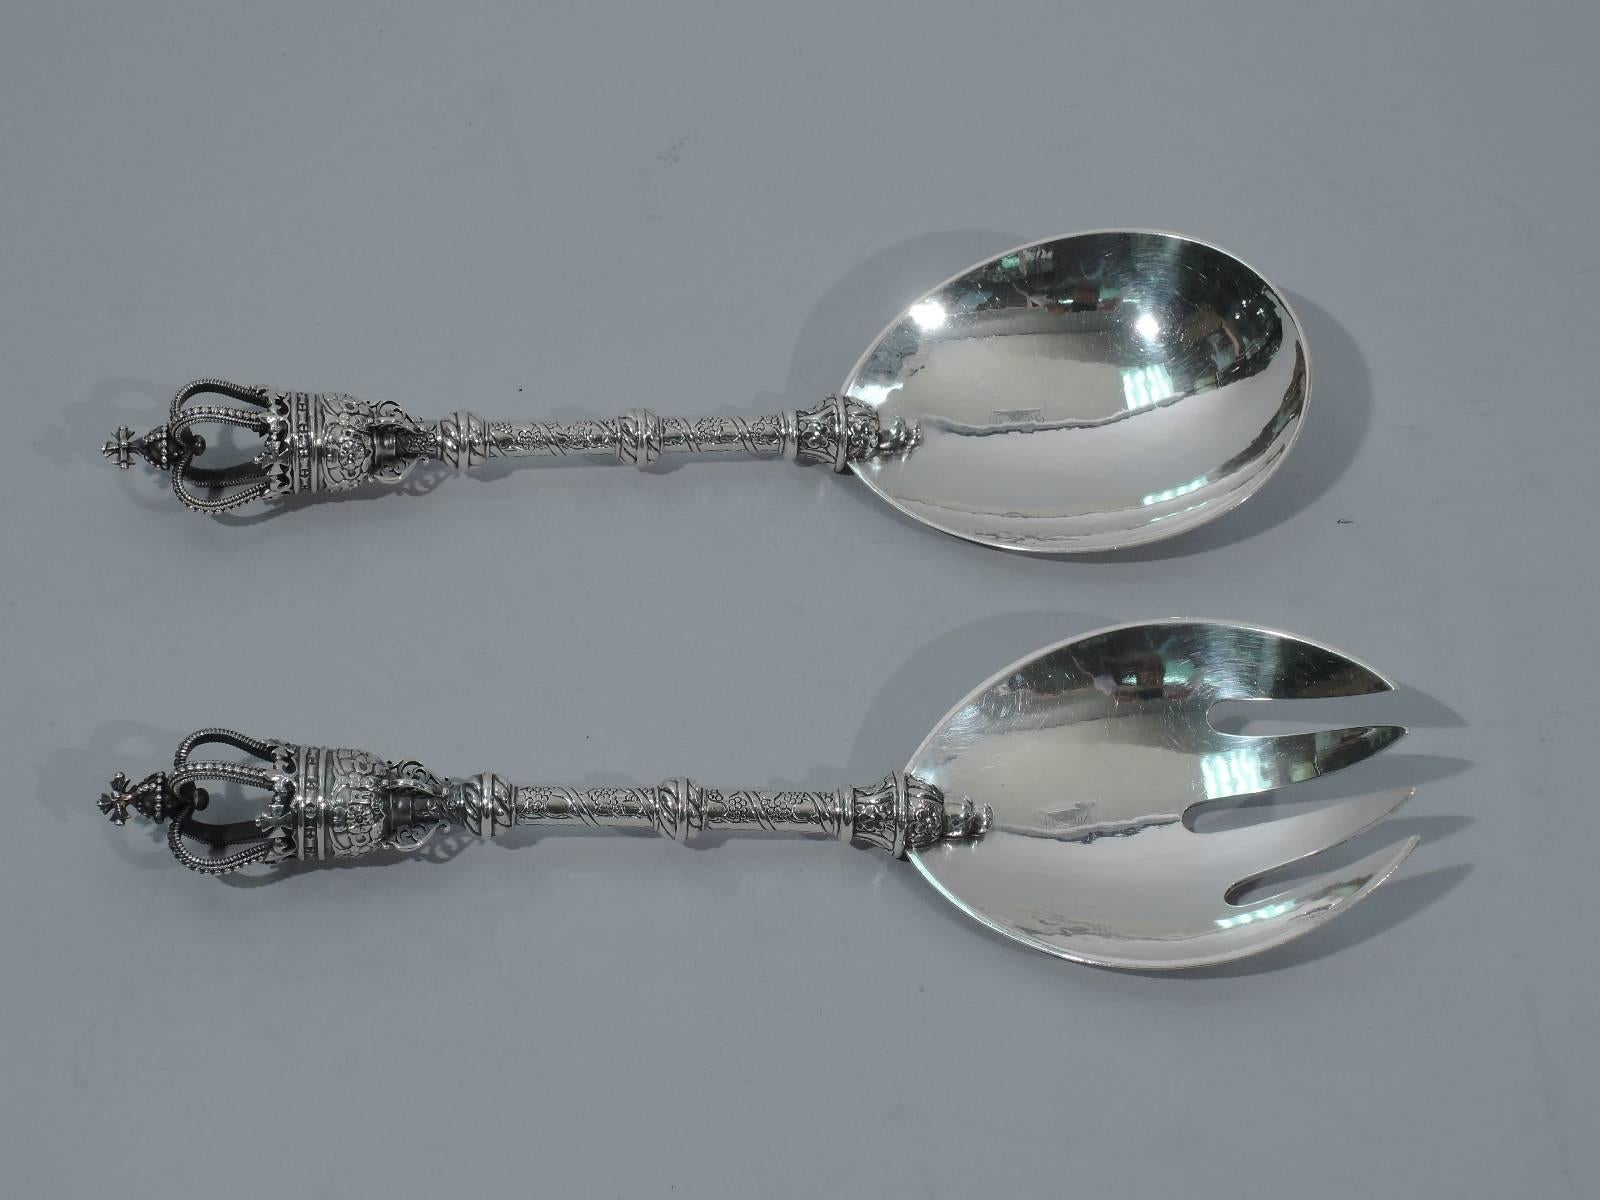 Early sterling silver salad serving pair. Made by Georg Jensen in Copenhagen, circa 1927. This pair comprises spoon and fork. Each: regal crown terminal, knopped and incised stem, and curved hand-hammered bowl (fork has 4 tines). A rare foray into